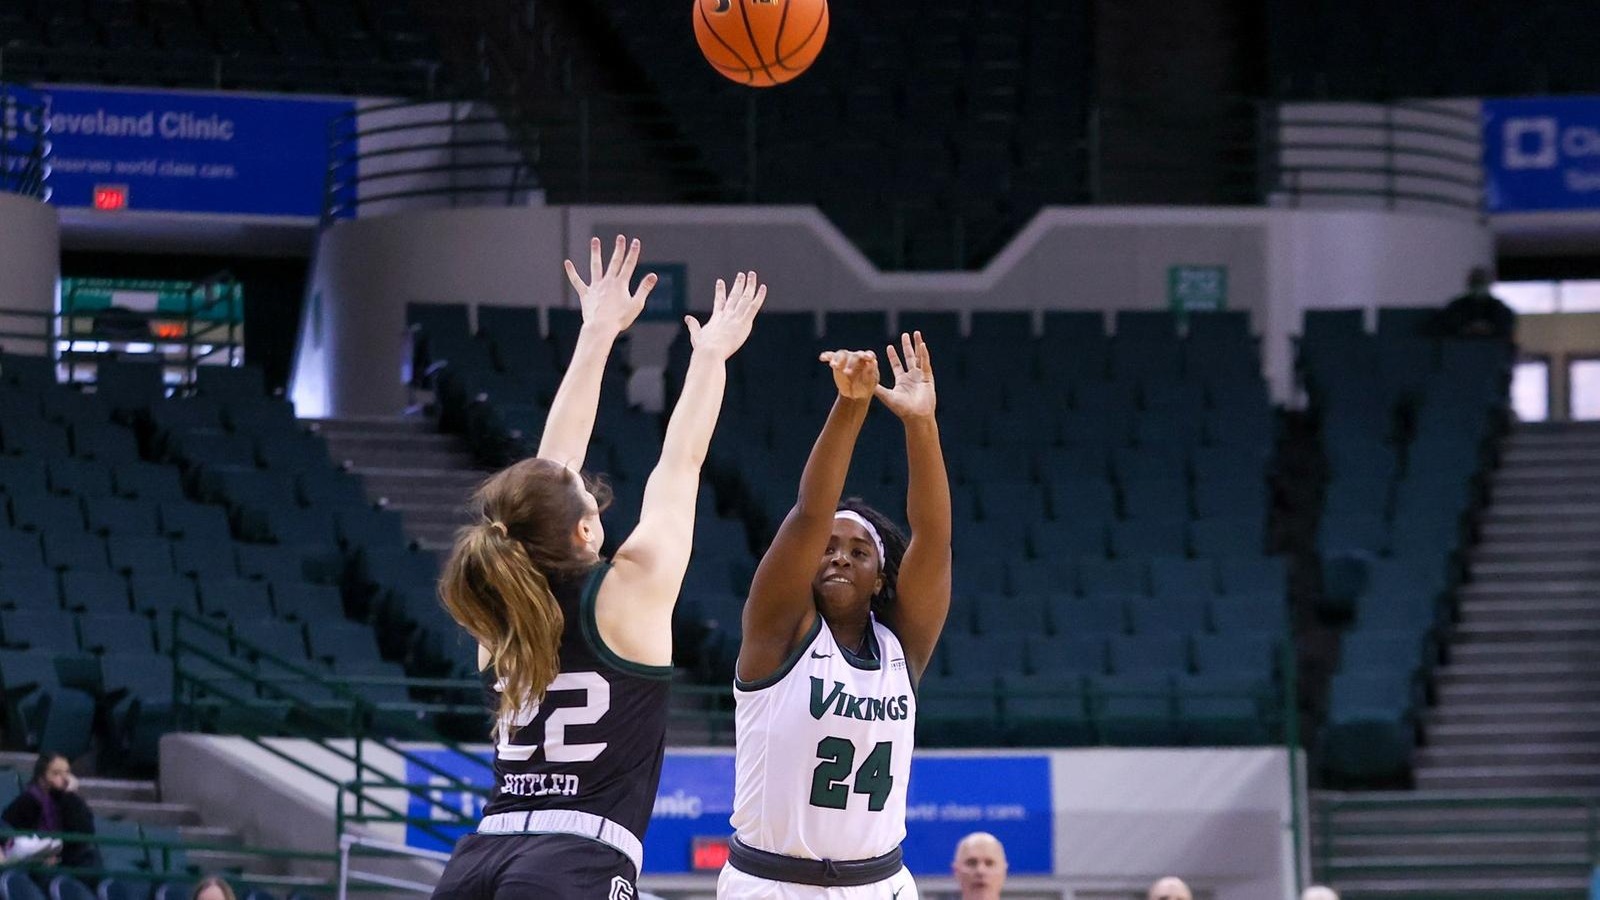 Cleveland State Women's Basketball Begins #HLWBB Tournament With Quarterfinal Game Against NKU